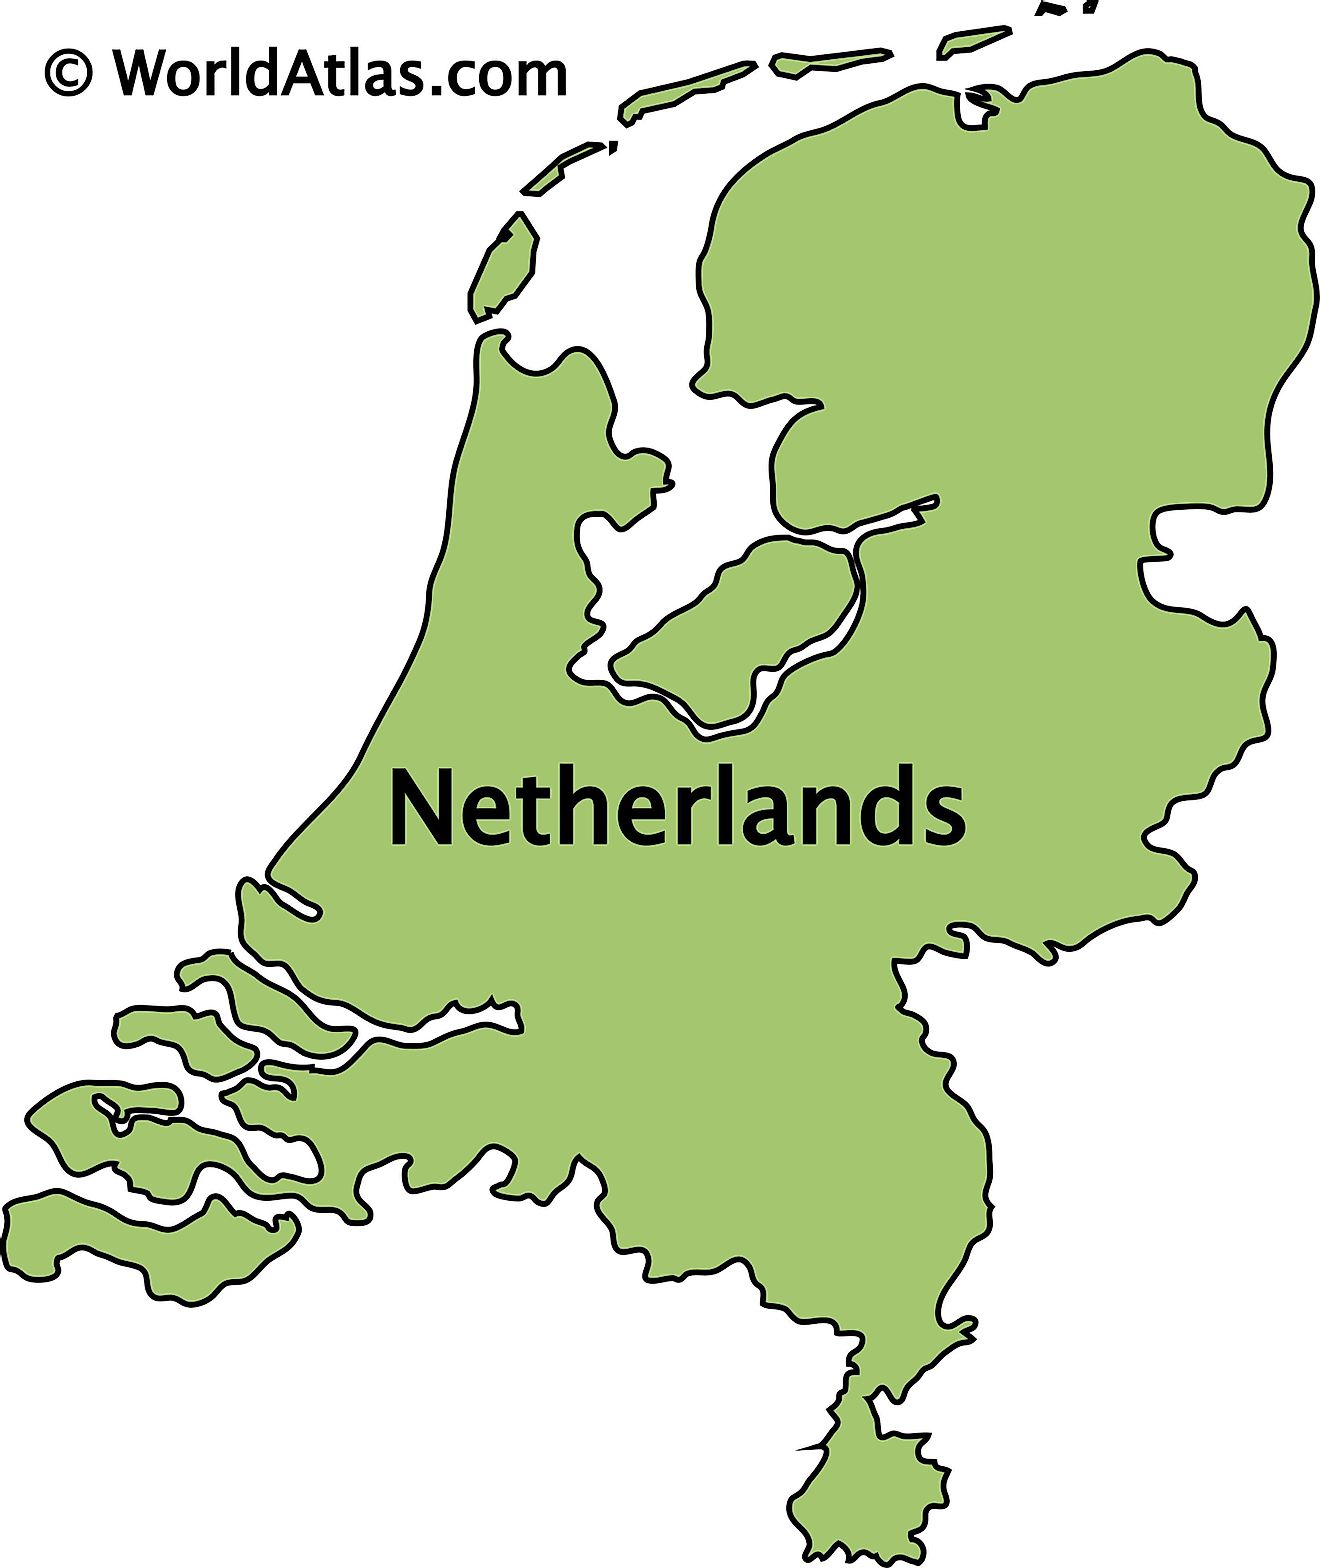 Outline Map of The Netherlands